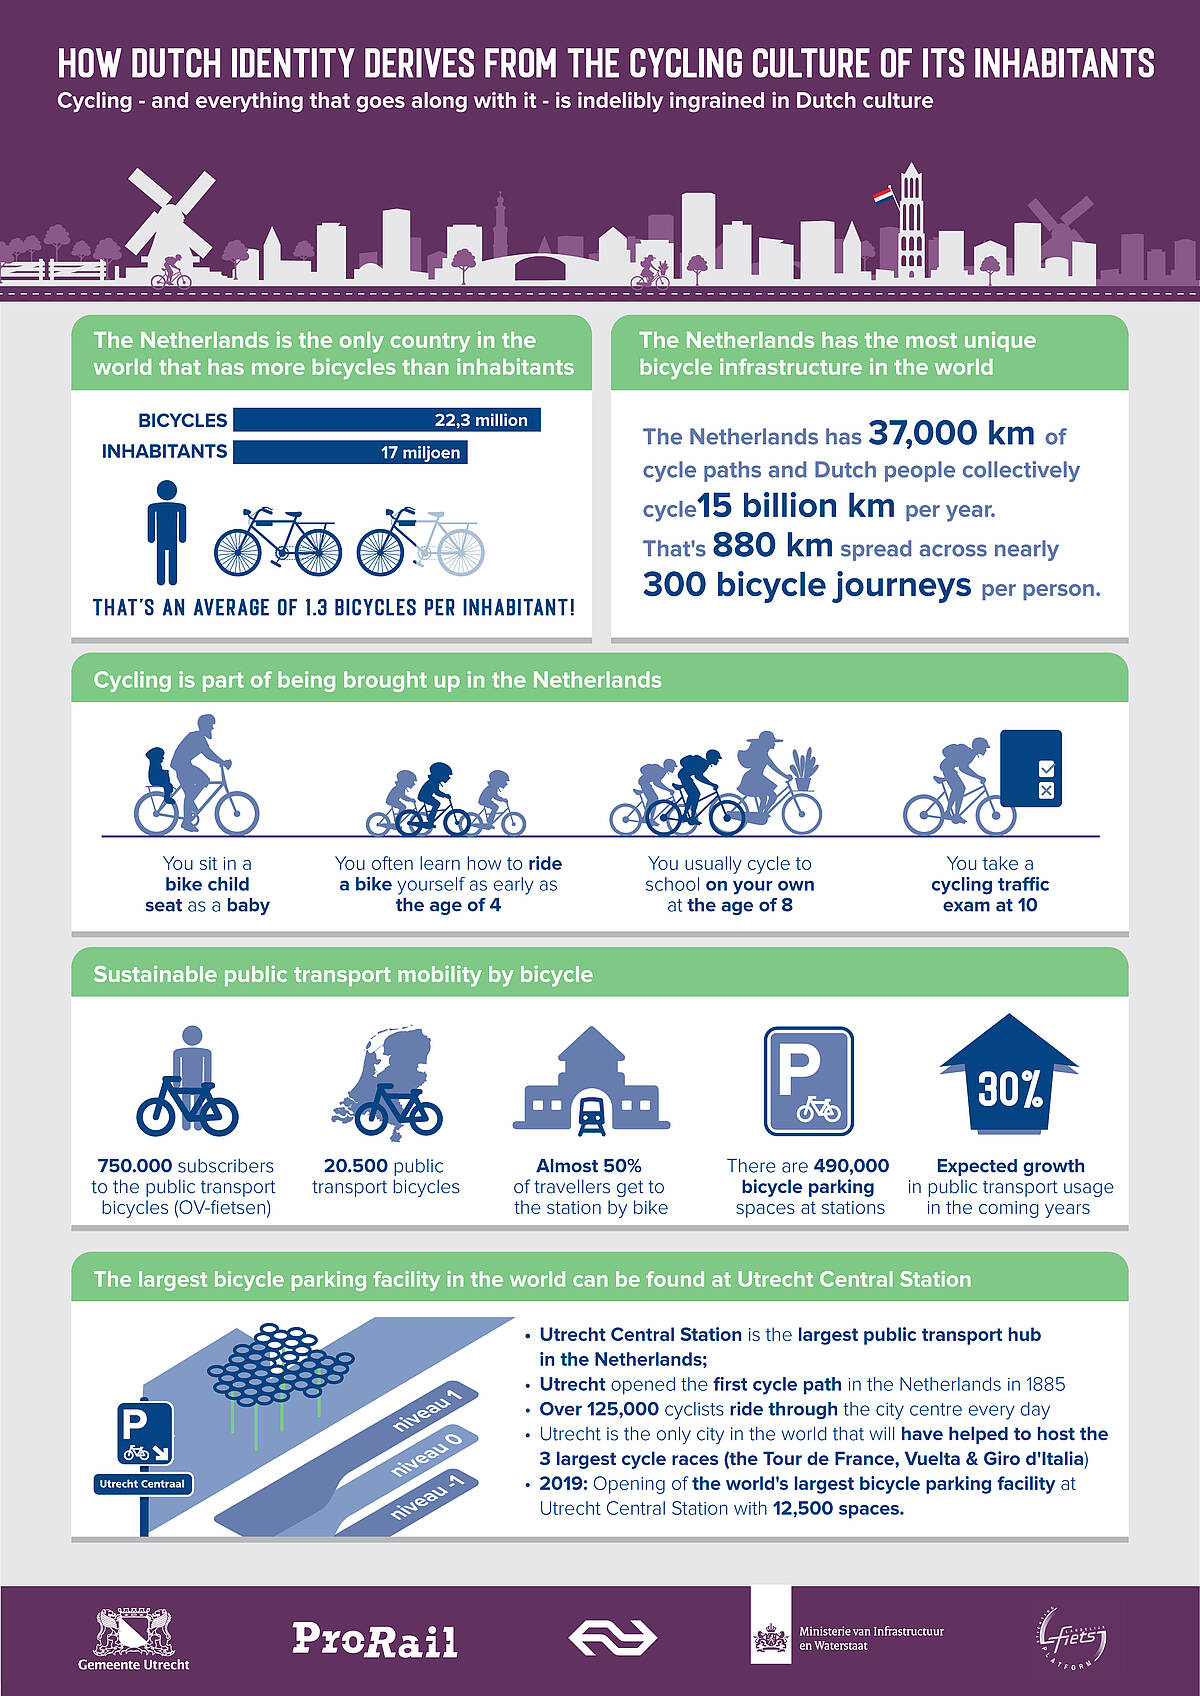 HOW DUTCH IDENTITY DERIVES FROM THE CYCLING CULTURE OF ITS INHABITANTS  Cycling - and everything that goes along with it - is indelibly ingrained in Dutch culture   The Netherlands is the only country in the world that has more bicycles than inhabitants  22.3 million bicycles 17 million inhabitants  That's an average of 1.3 bicycles per inhabitant!  The Netherlands has the most unique bicycle infrastructure in the world The Netherlands has 37,000 kilometres of cycle paths and Dutch people collectively cycle 15 billion kilometres per year. That's 880 km spread across nearly 300 bicycle journeys per person.  Cycling is part of being brought up in the Netherlands •	You sit in a bike child seat as a baby •	You often learn how to ride a bike yourself as early as the age of 4 •	You usually cycle to school on your own at the age of 8 •	You take a cycling traffic exam at 10  Sustainable public transport mobility by bicycle •	750,000 people with subscriptions to the public transport bicycles (OV-fietsen) •	20,500 public transport bicycles •	Almost 50% of travellers get to the station by bike •	There are 490,000 bicycle parking spaces at stations •	Growth in public transport usage is expected in the coming years   The largest bicycle parking facility in the world can be found at Utrecht Central Station  •	Utrecht Central Station is the largest public transport hub in the Netherlands;  •	Utrecht opened the first cycle path in the Netherlands in 1885 •	Over 125,000 cyclists ride through the city centre every day •	Utrecht is the only city in the world that will have helped to host the 3 largest cycle races (the Tour de France, Vuelta & Giro d'Italia) •	2019: Opening of the world's largest bicycle parking facility at Utrecht Central Station with 12,500 spaces. 